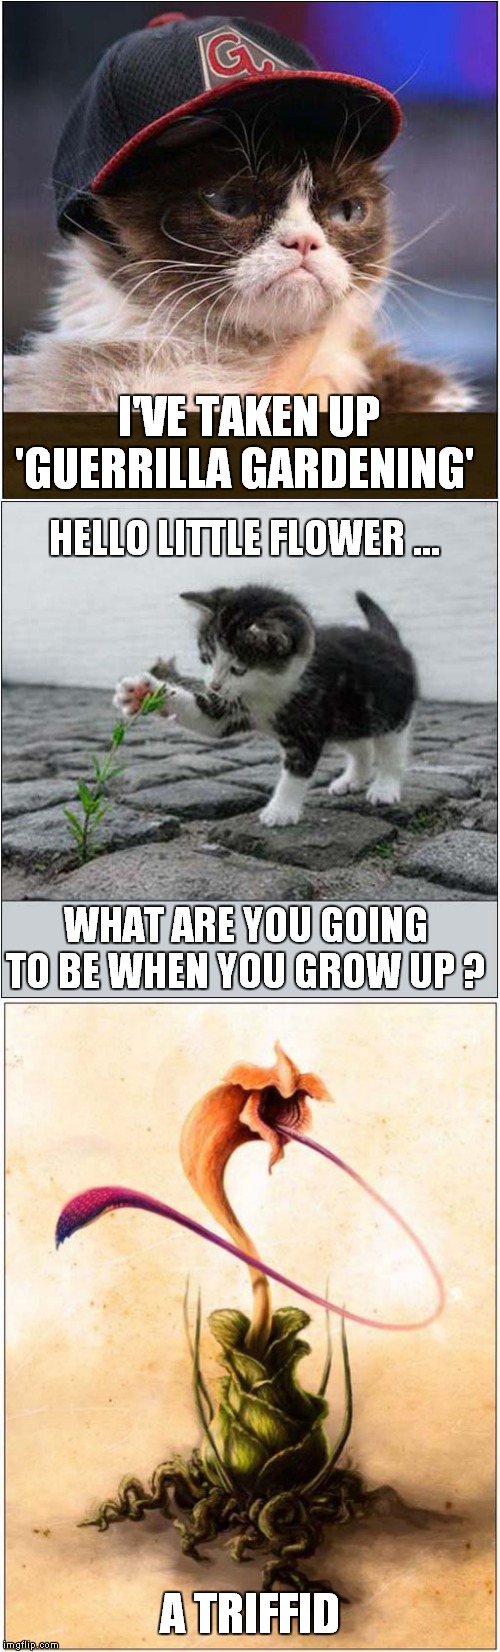 Grumpys Guerrilla Gardening Plan | I'VE TAKEN UP 'GUERRILLA GARDENING'; HELLO LITTLE FLOWER …; WHAT ARE YOU GOING TO BE WHEN YOU GROW UP ? A TRIFFID | image tagged in cats,grumpy cat,the day of the triffids | made w/ Imgflip meme maker